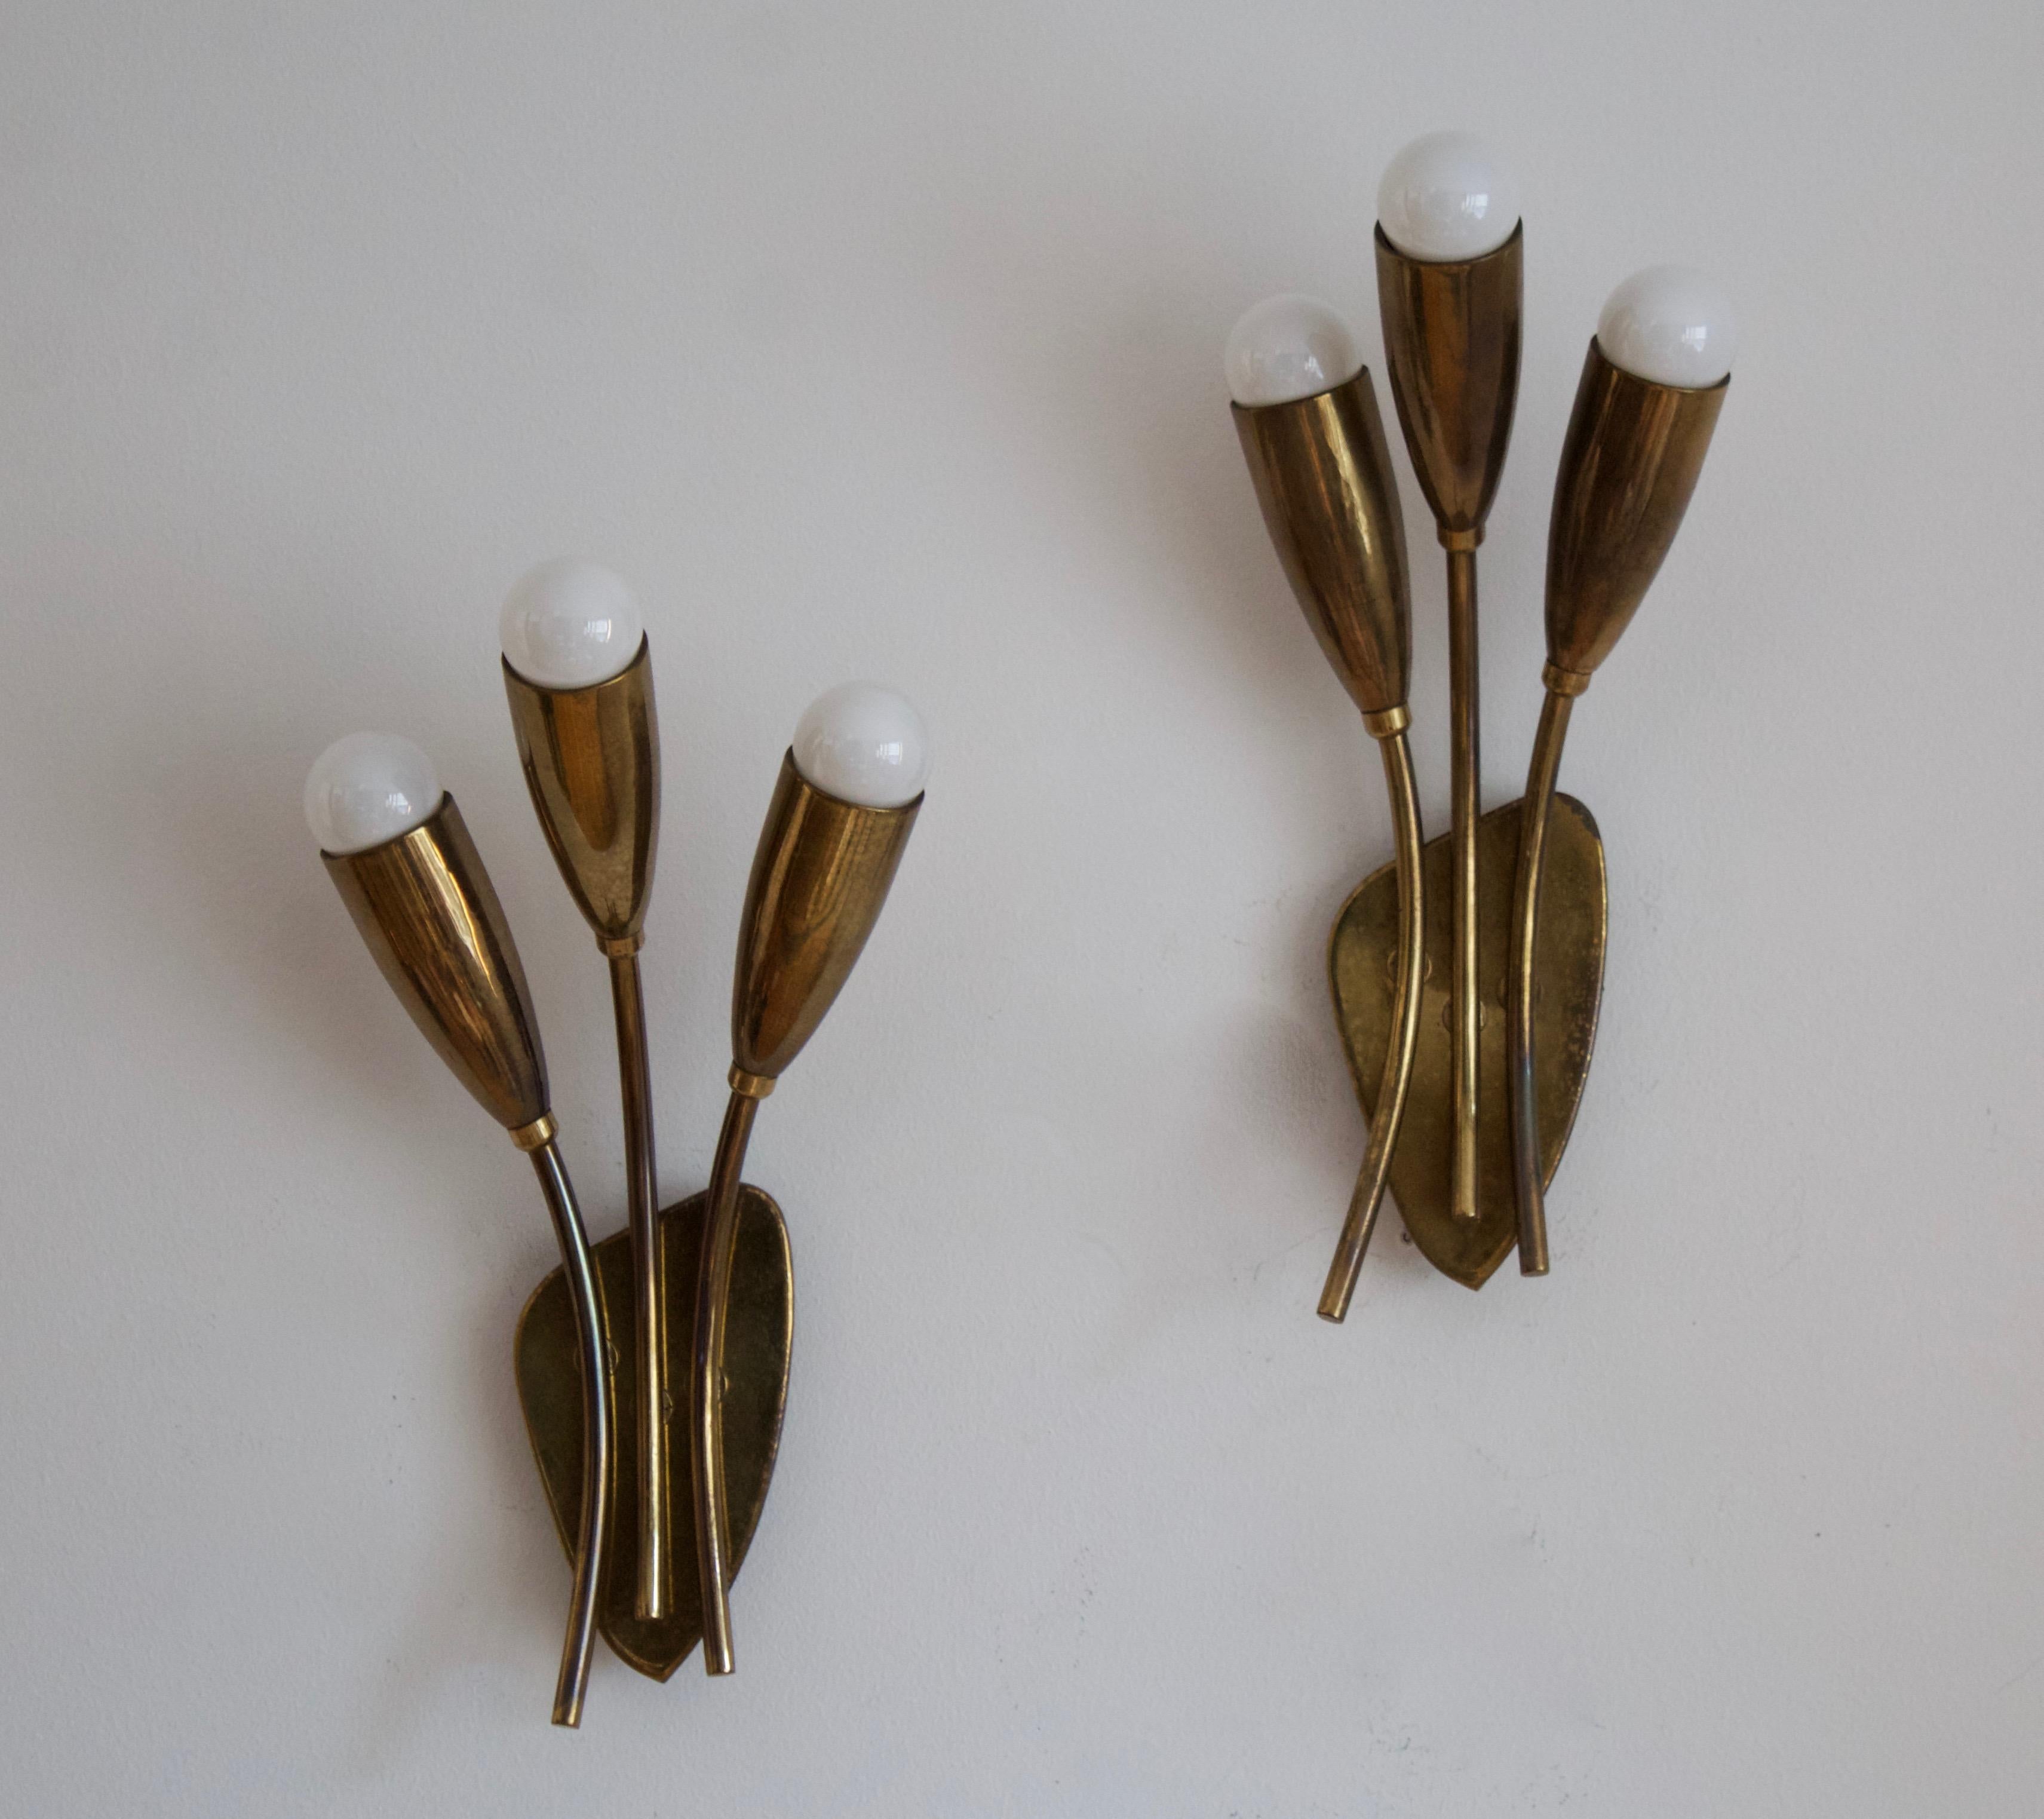 A pair of two-armed wall lights. designed and produced in Sweden, 1950s. Can also function as flush mount ceiling light.

Stated dimensions with lightbulbs attached.